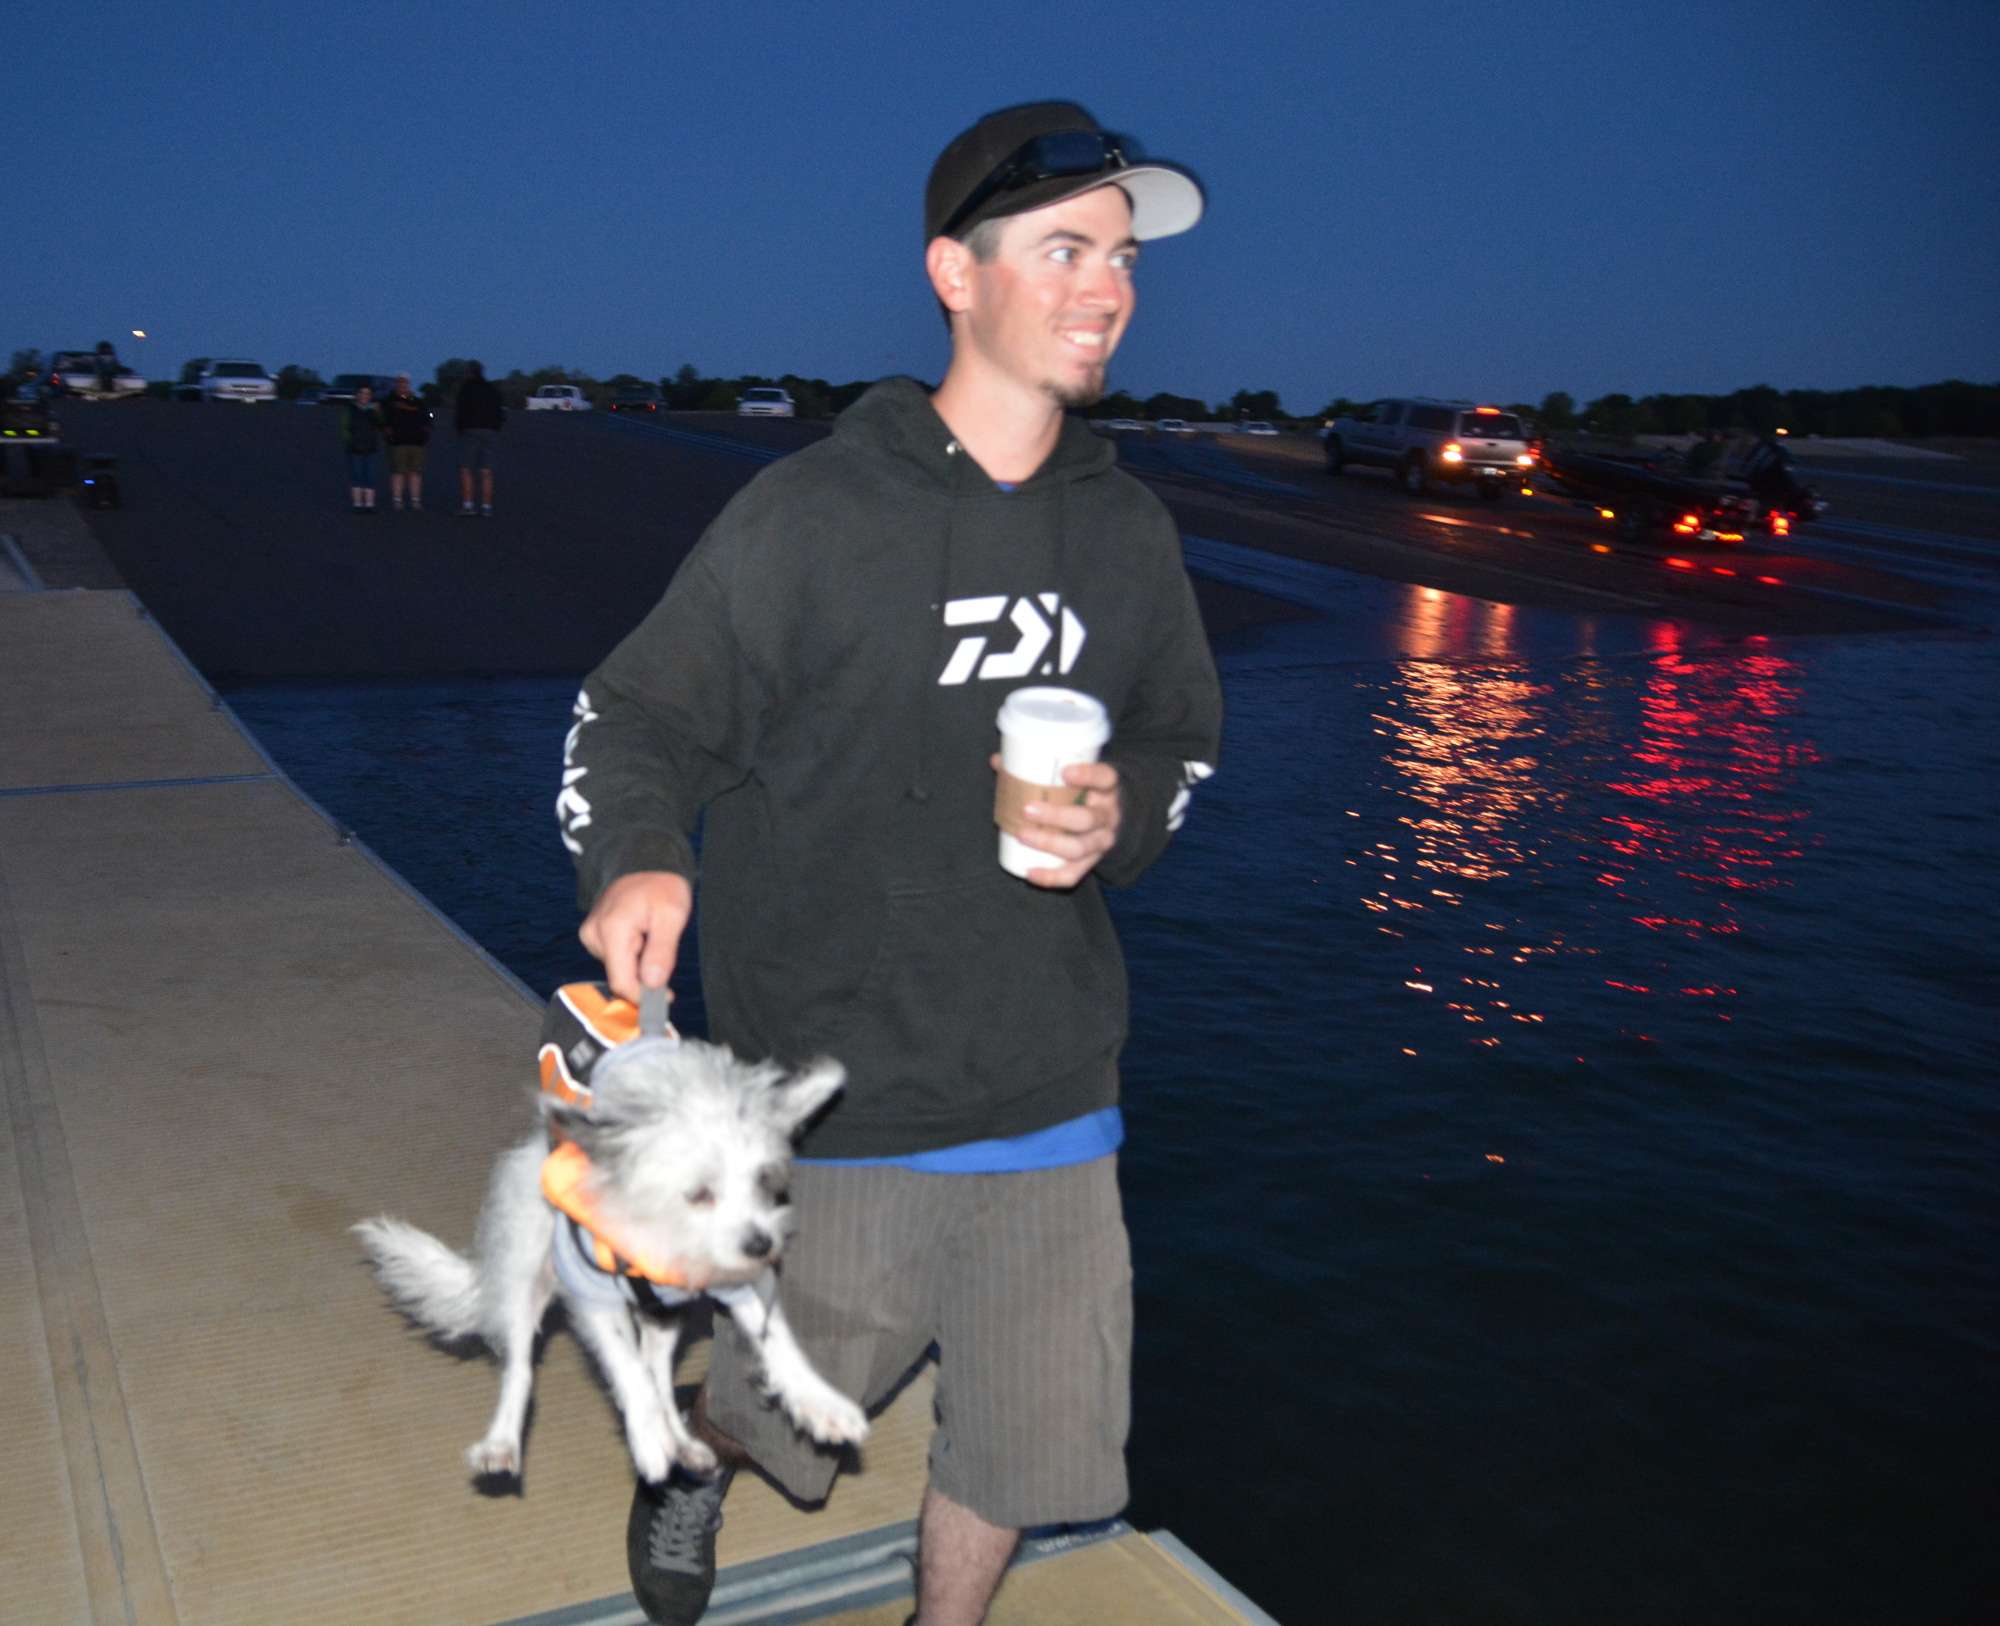 But Joey Fortina saved the day, carrying Ziggy by the handle on his doggy life jacket.